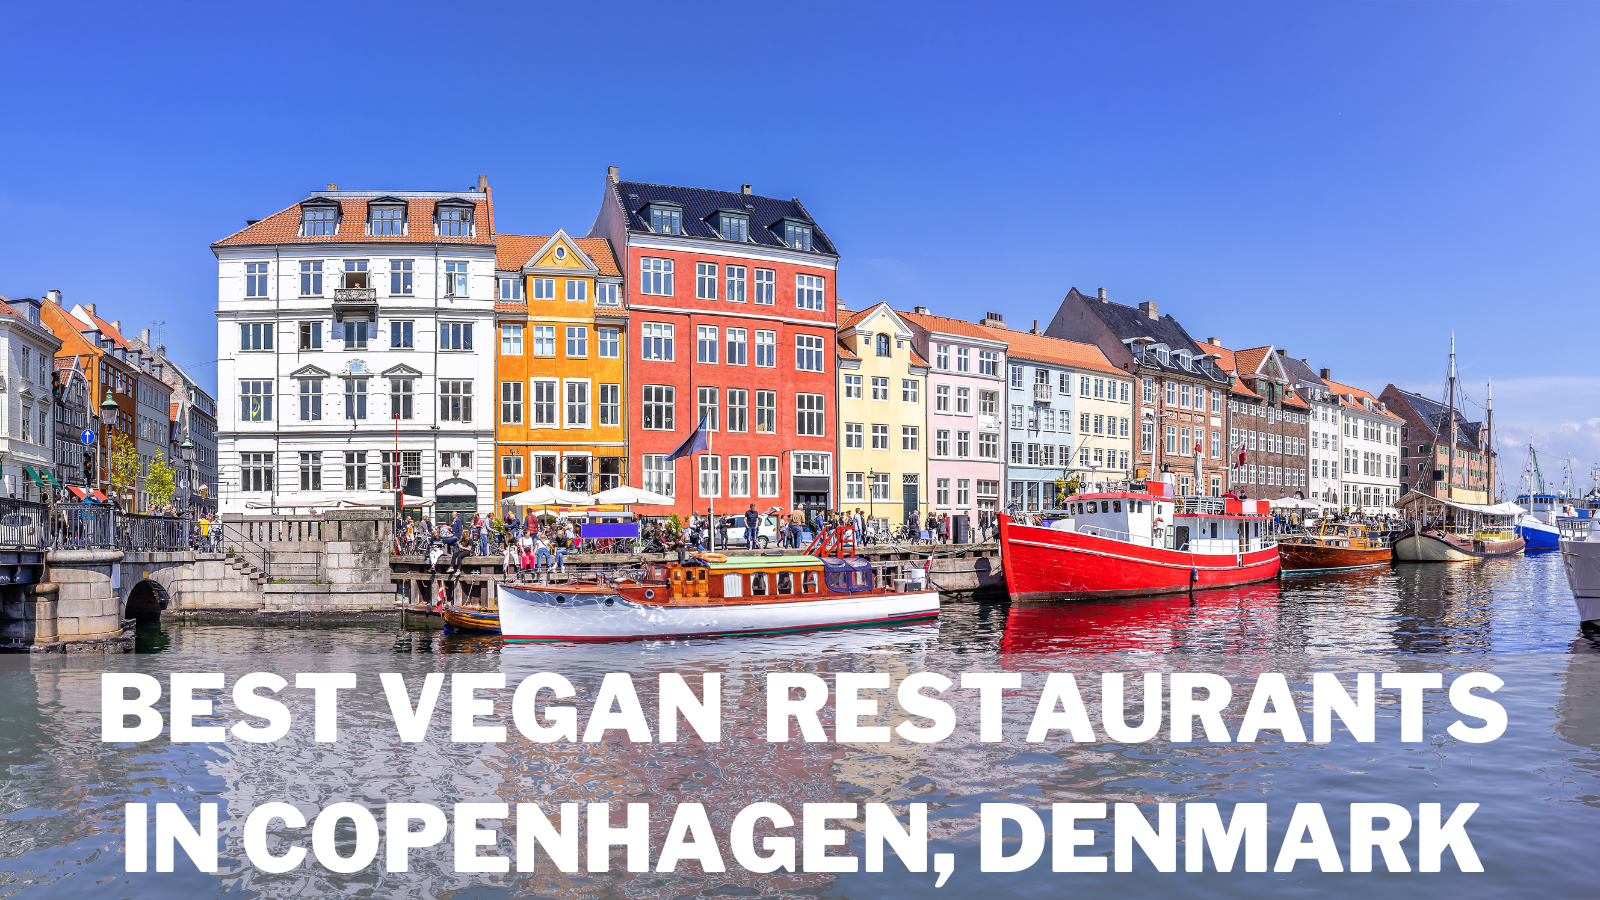 Conclusion: Copenhagen has a variety of vegan restaurants to choose from, offering a range of options, from burgers and sandwiches to raw vegan dishes, porridge and Ayurvedic dishes. Some popular options include Astrid och Aporna, Kødbyens Fiskebar, Grød, Veganeriet, The Organic Boho, Sattva, Riz Raz, Café N, The Green Kitchen and 42Raw. Remember that this is not an exhaustive list, and there might be many other great vegan restaurants in the city.